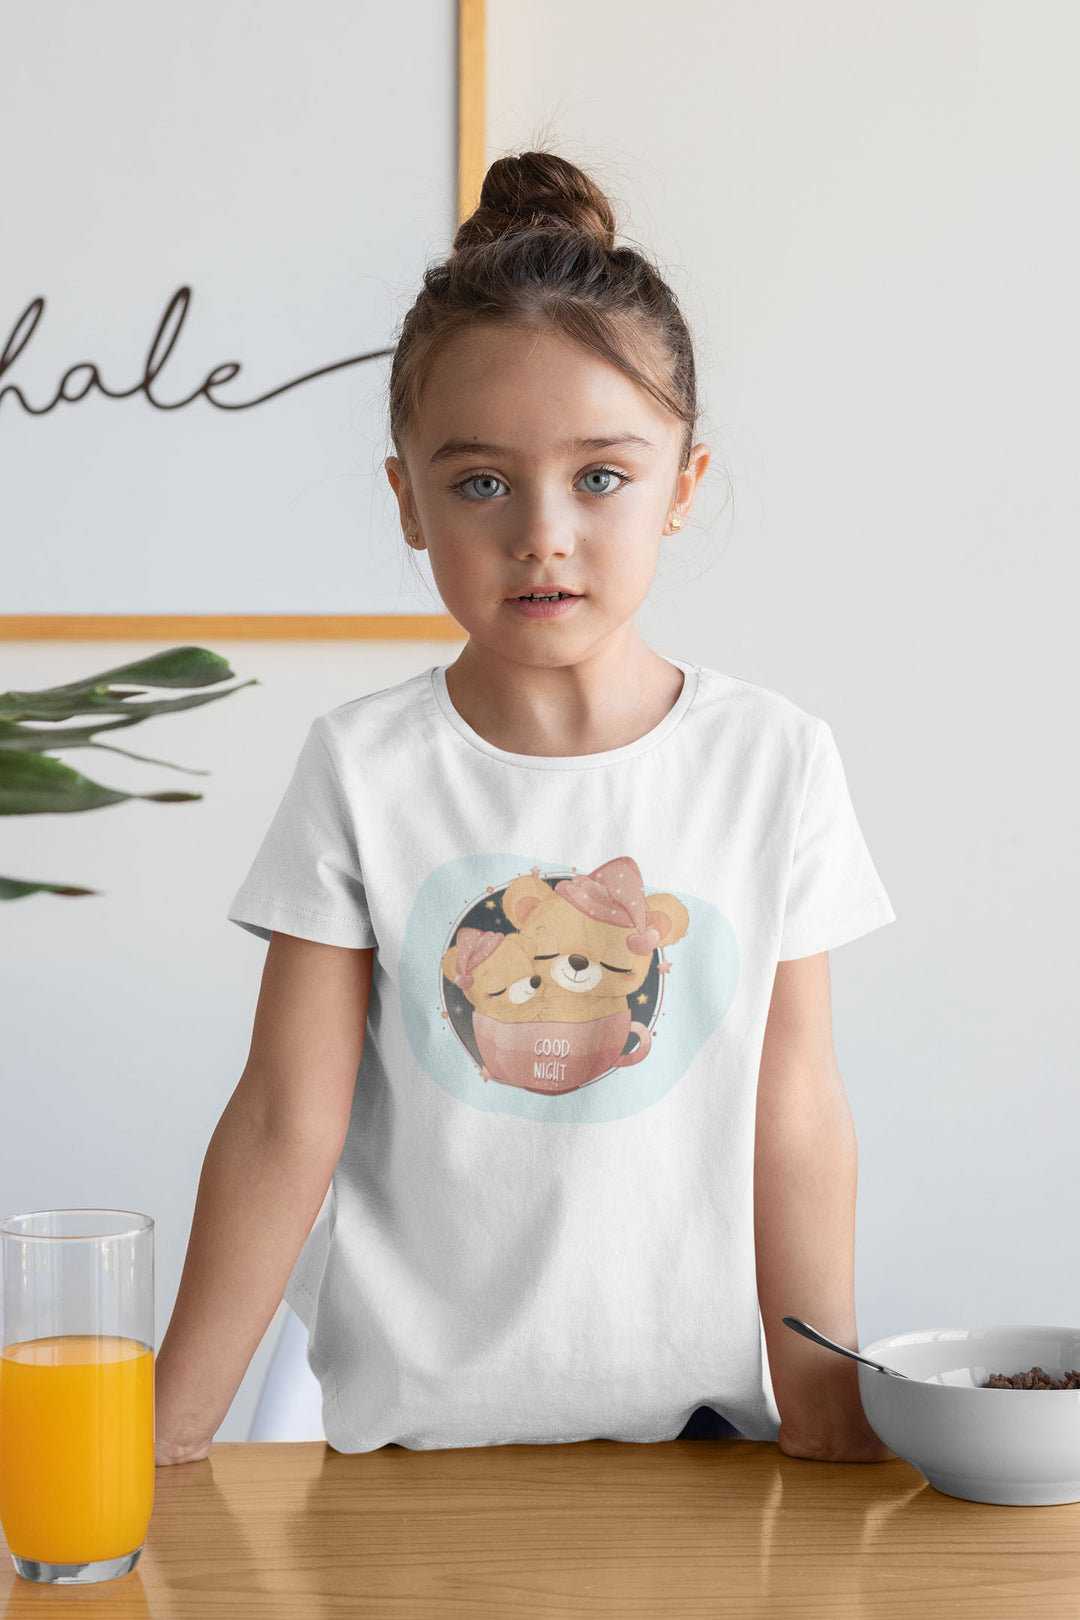 Baby Bear Girl Sleeping In Cup With Mom. Short Sleeve T-shirt For Toddler And Kids. - TeesForToddlersandKids -  t-shirt - sleep - baby-bear-girl-sleeping-in-cup-with-mom-short-sleeve-t-shirt-for-toddler-and-kids